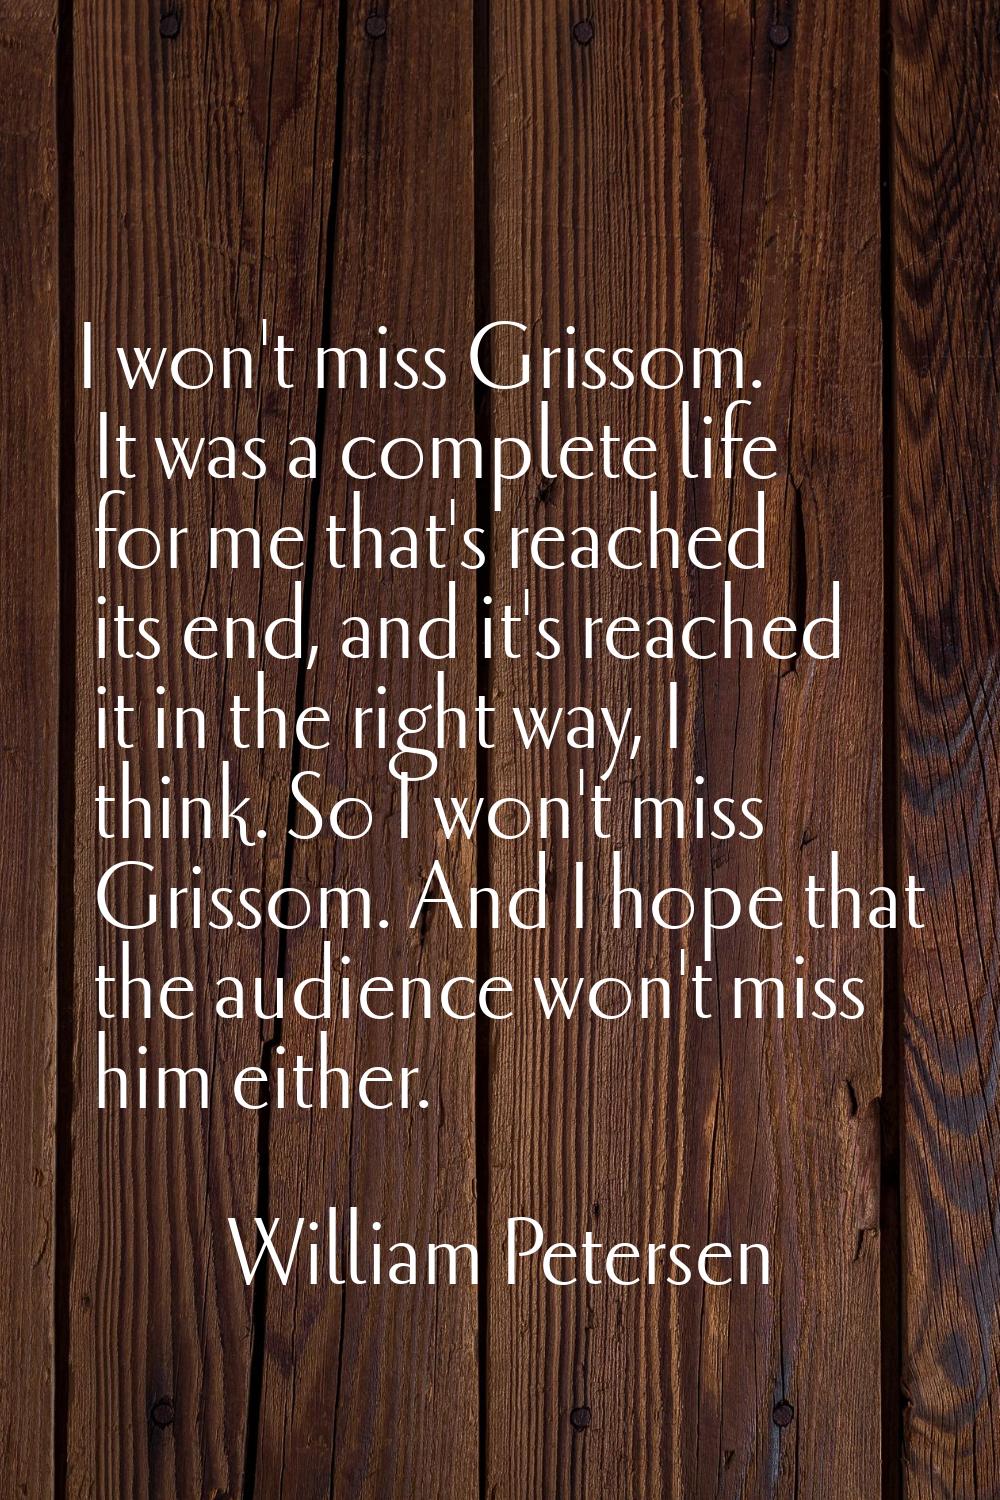 I won't miss Grissom. It was a complete life for me that's reached its end, and it's reached it in 